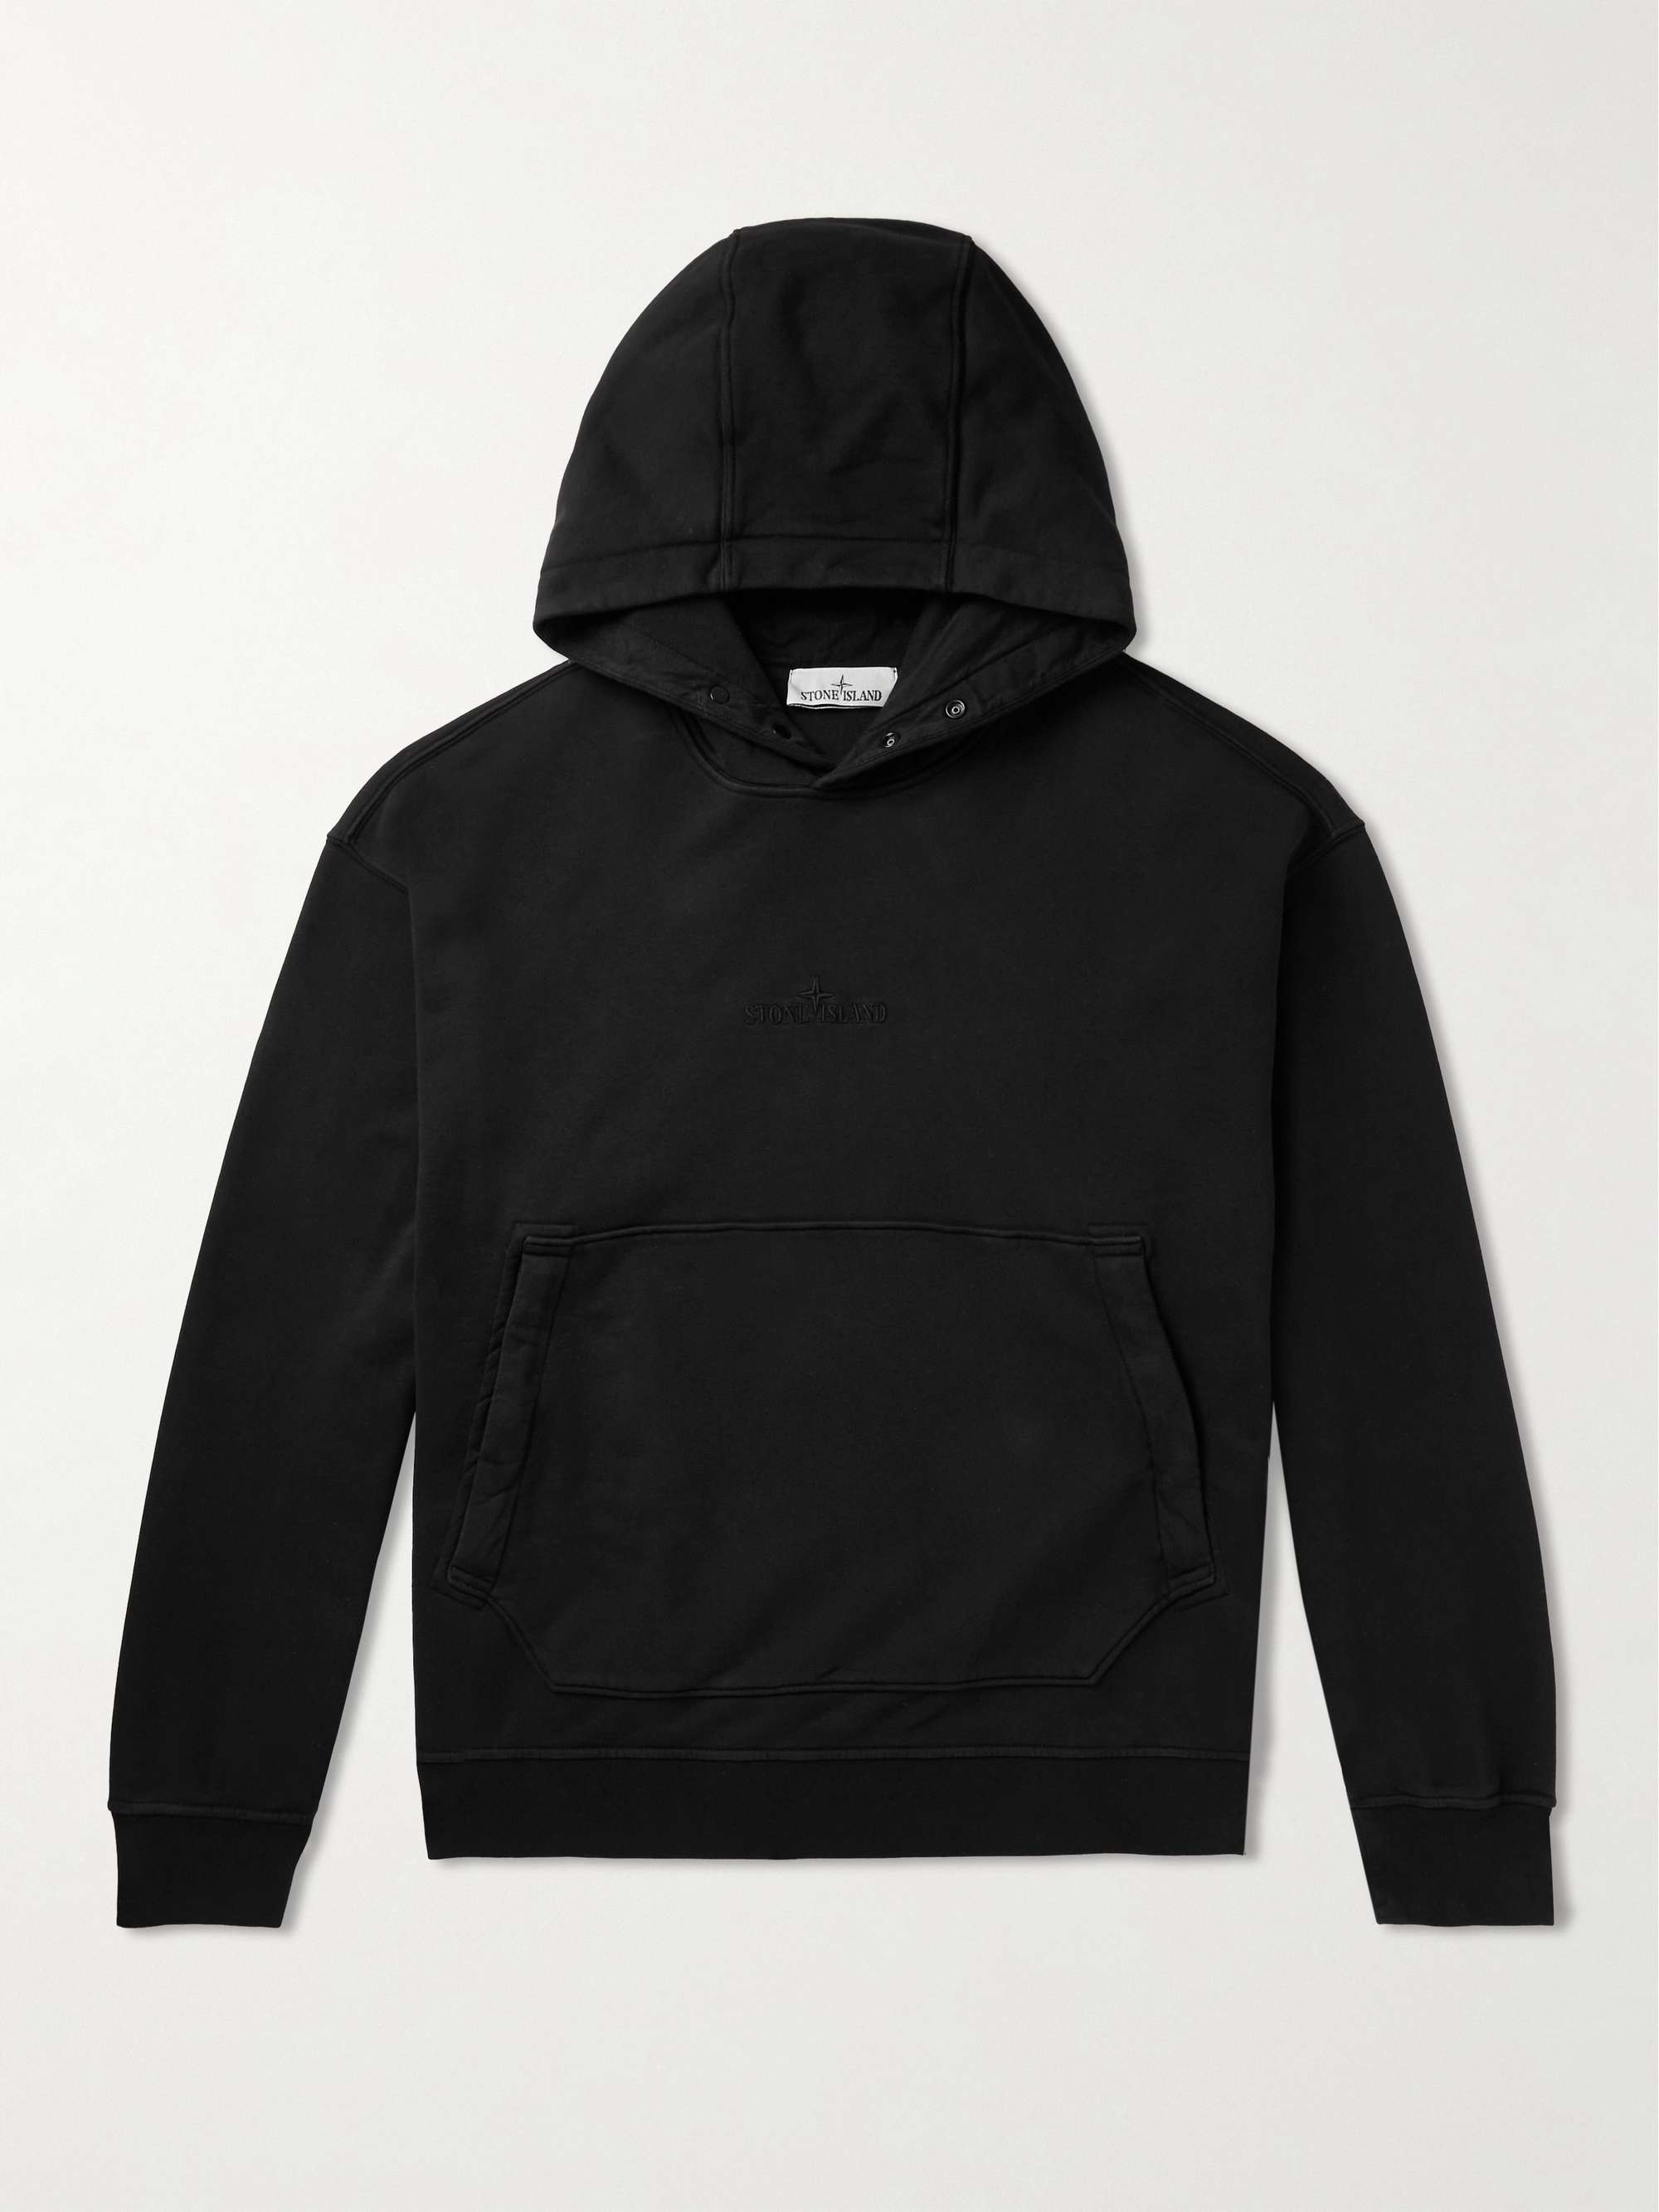 STONE ISLAND Logo-Embroidered Cotton-Jersey Hoodie for Men | MR PORTER